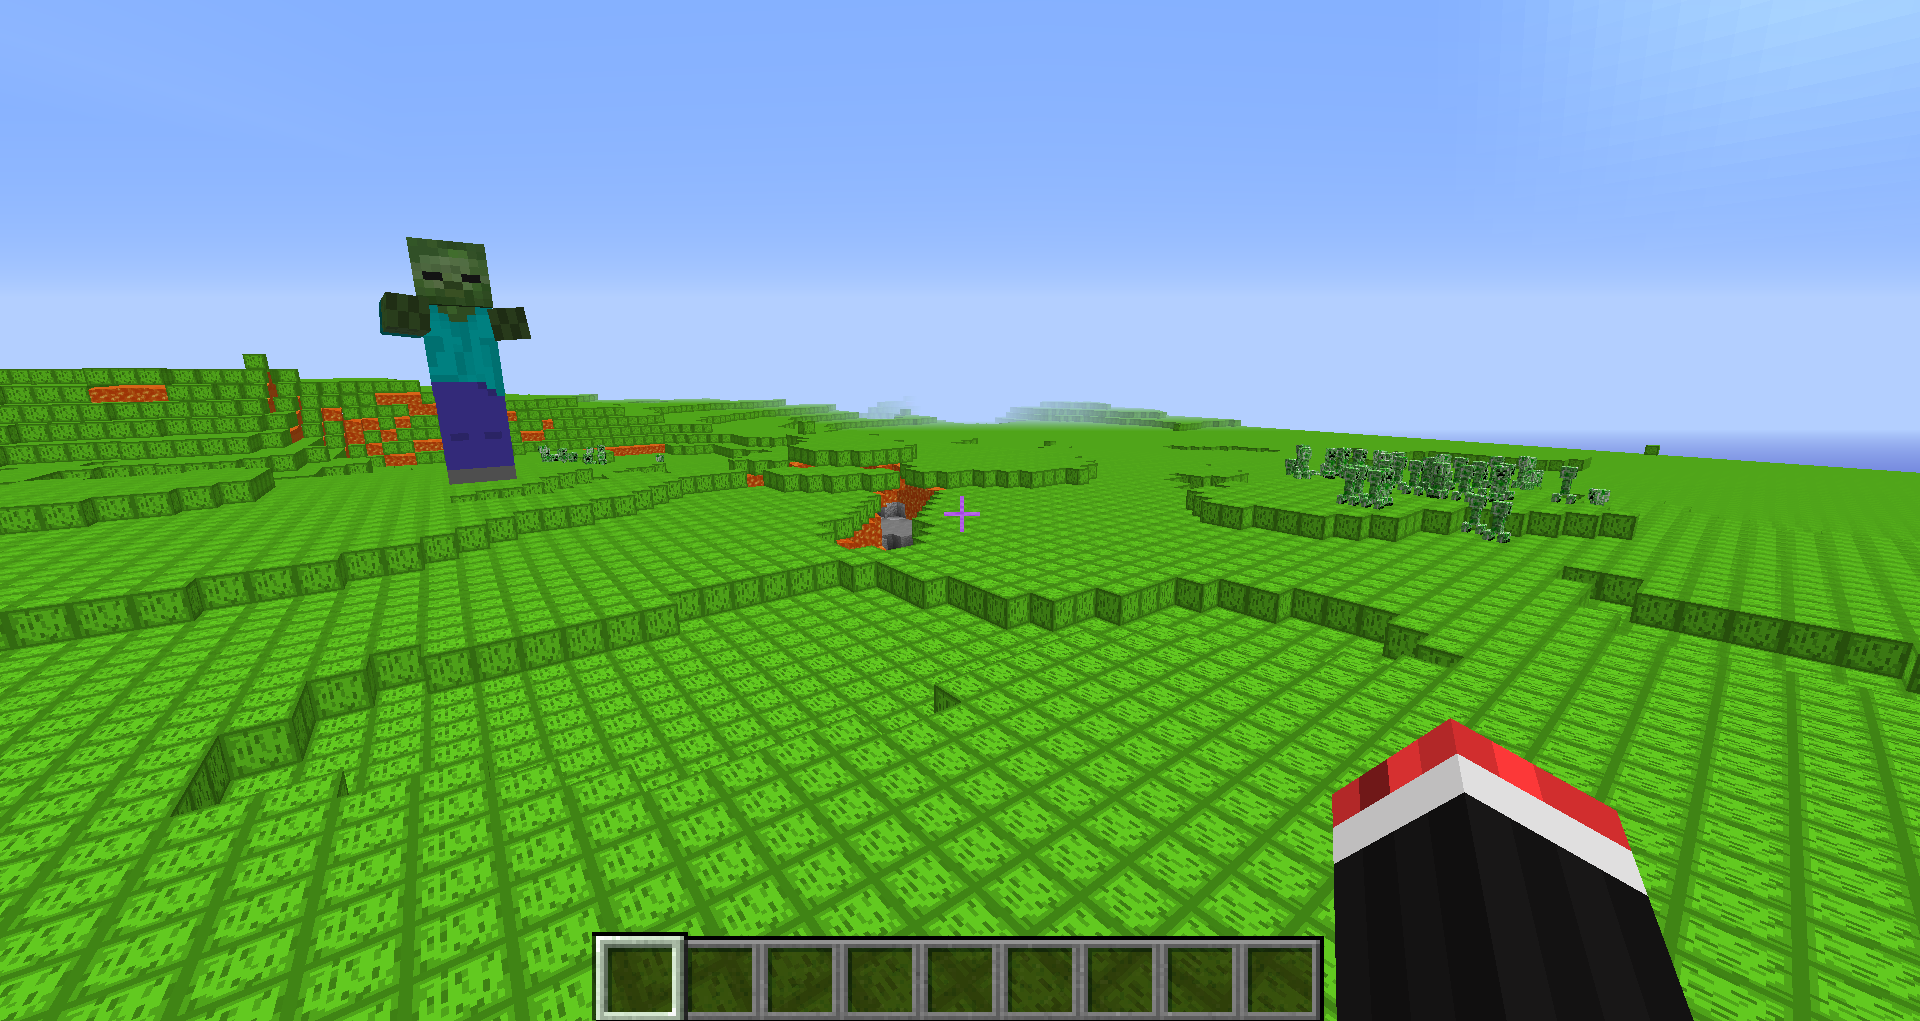 And a new biome 